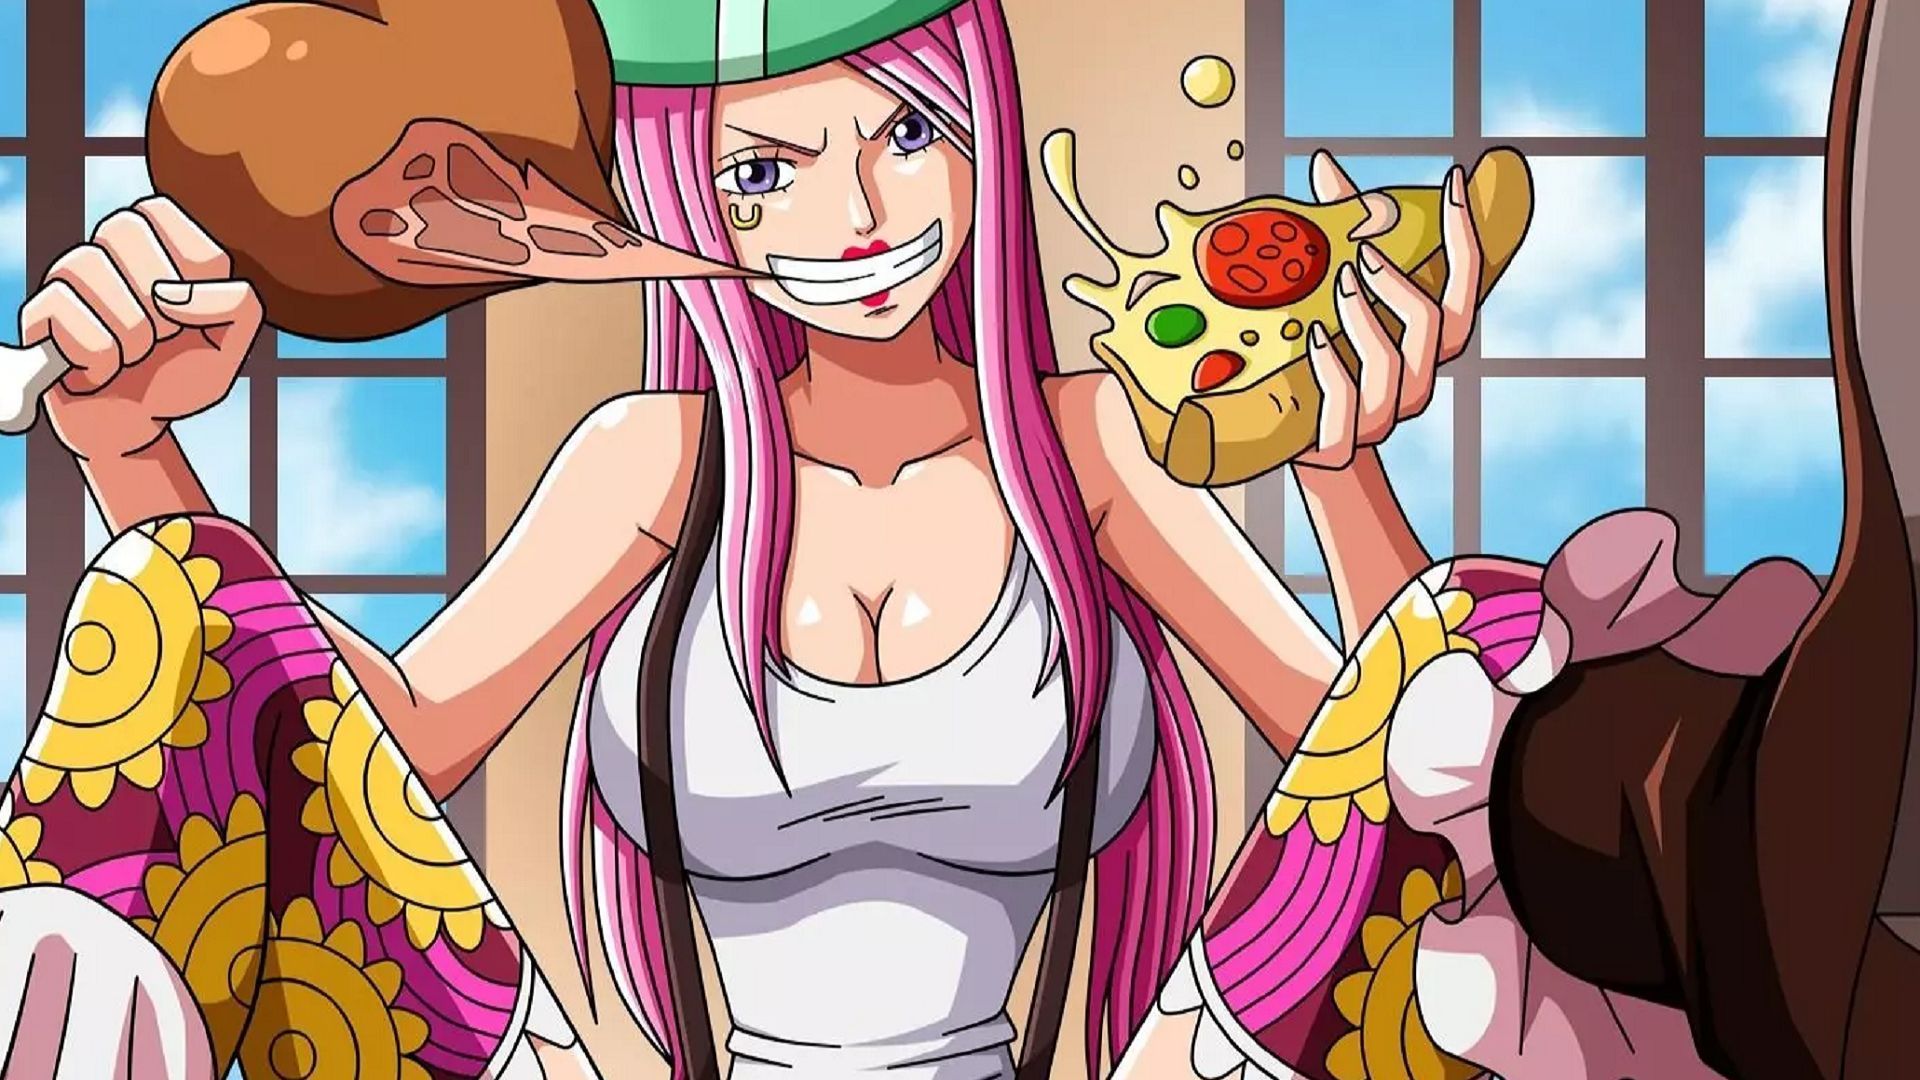 Bonney also was introduced in One Piece while eating meat (Image via Toei Animation, One Piece)